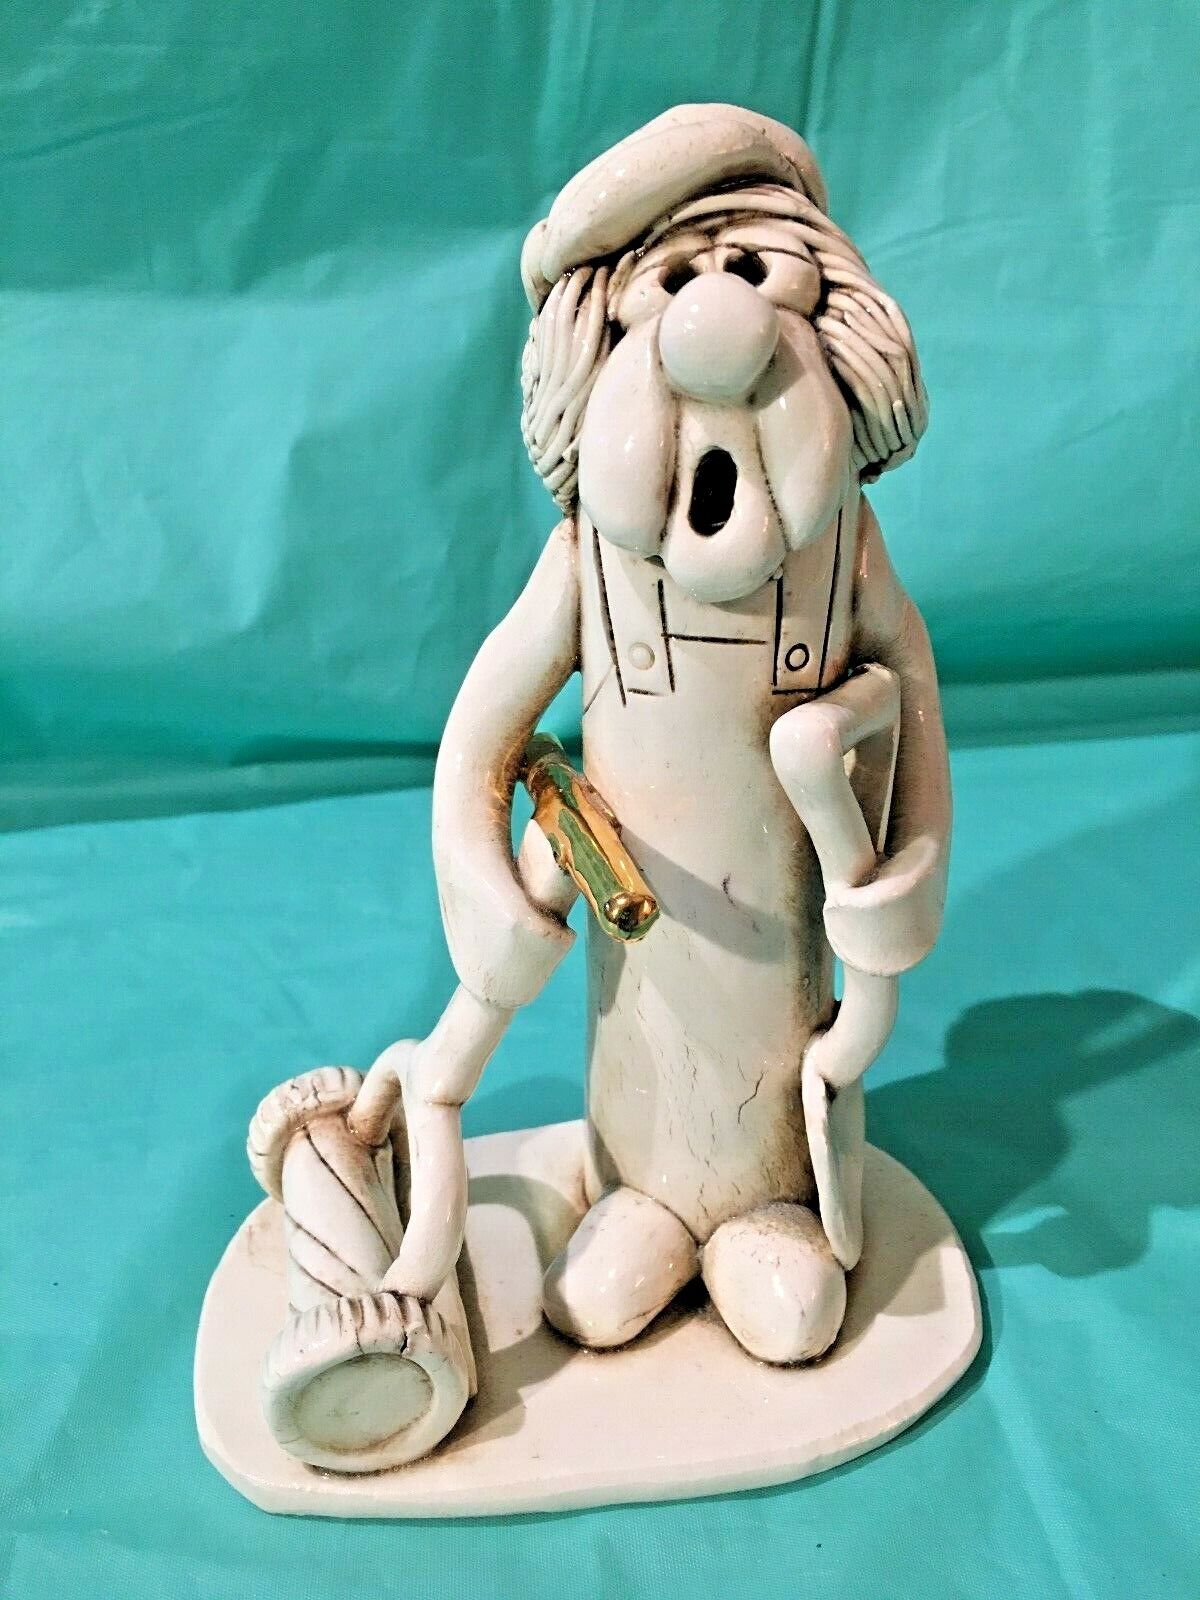 Vintage Handcrafted Pottery Gardener Figurine by Peck 1987